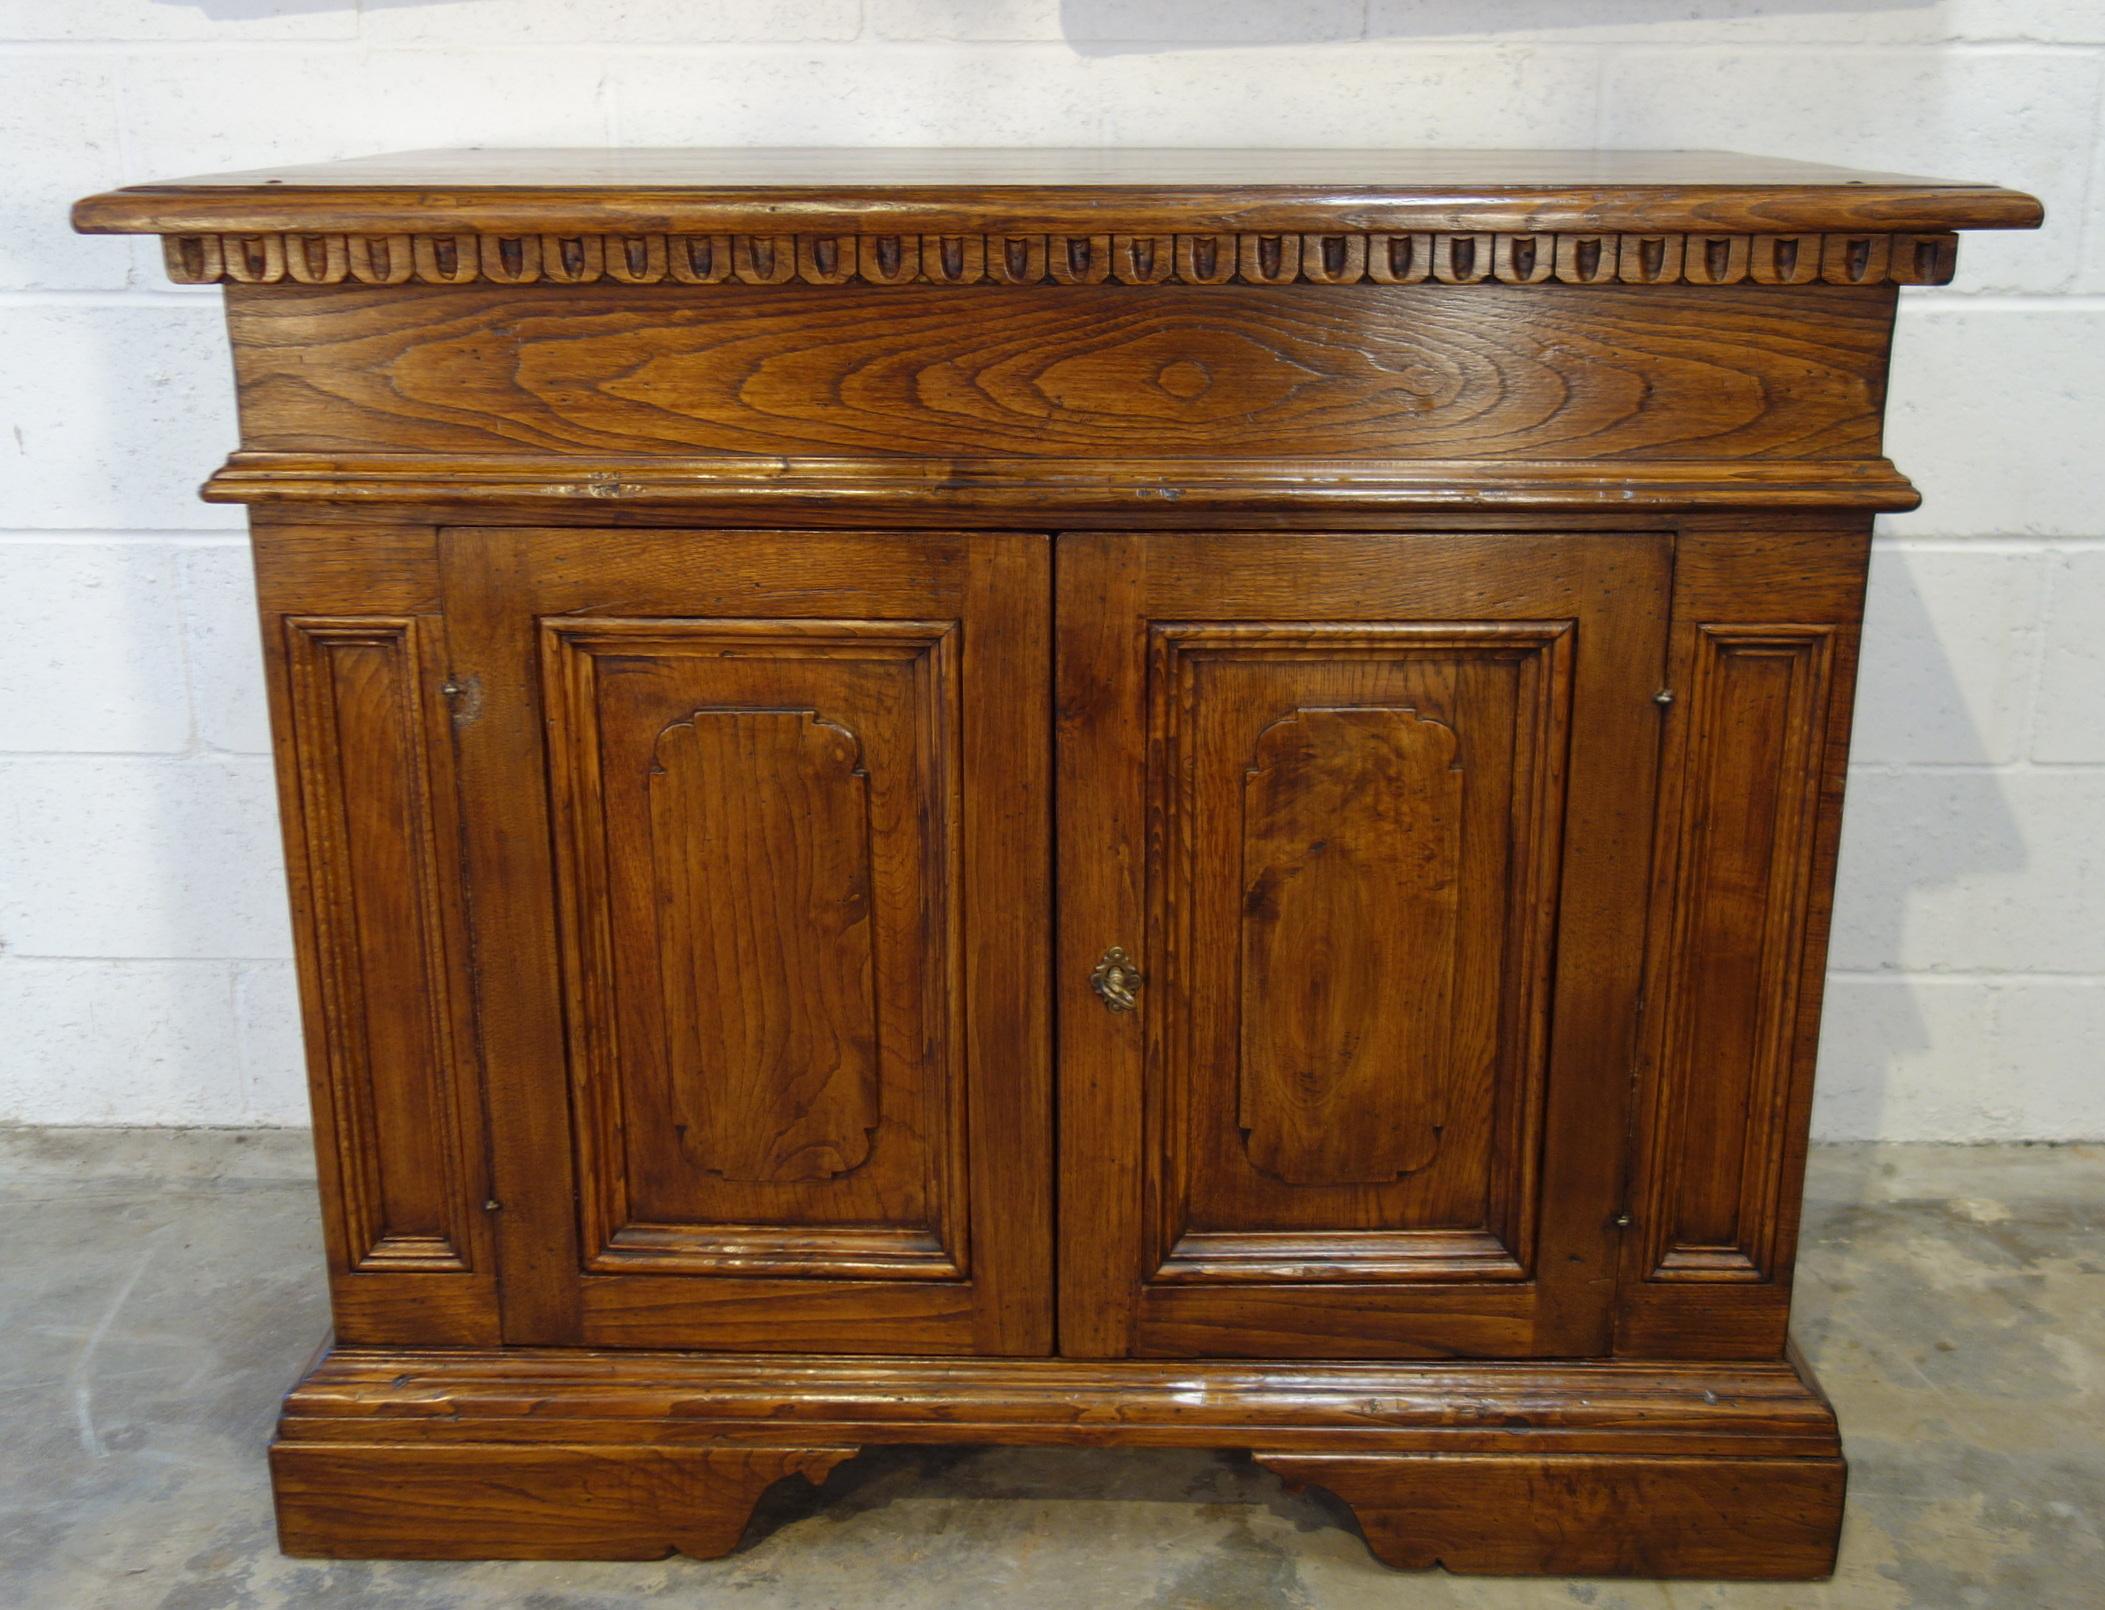 “MAGGIORE” Credenza - The Italian Art & Handcraft of Fine Antique Reproduction

“Maggiore” 2-door Credenza, with (or without) Renaissance dentil detail:

Measures: 43”W x 35”H x 24”D (each door measures 14”W x 22”H x 1.65” thick, front pillars each